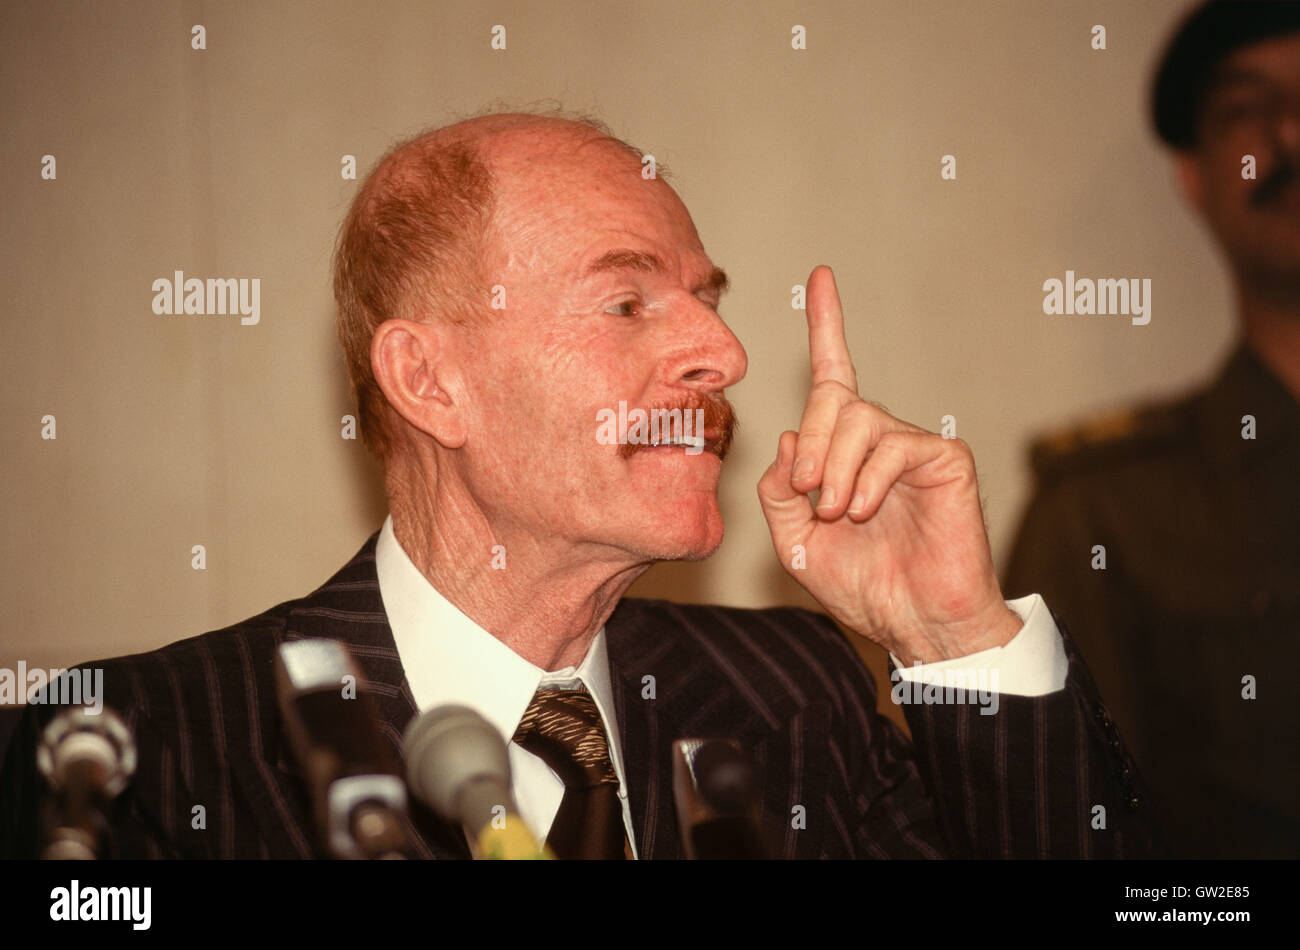 Baghdad, Iraq -- Izzat Ibrahim al-Douri in Baghdad as head of the elections committee 1990s. Stock Photo